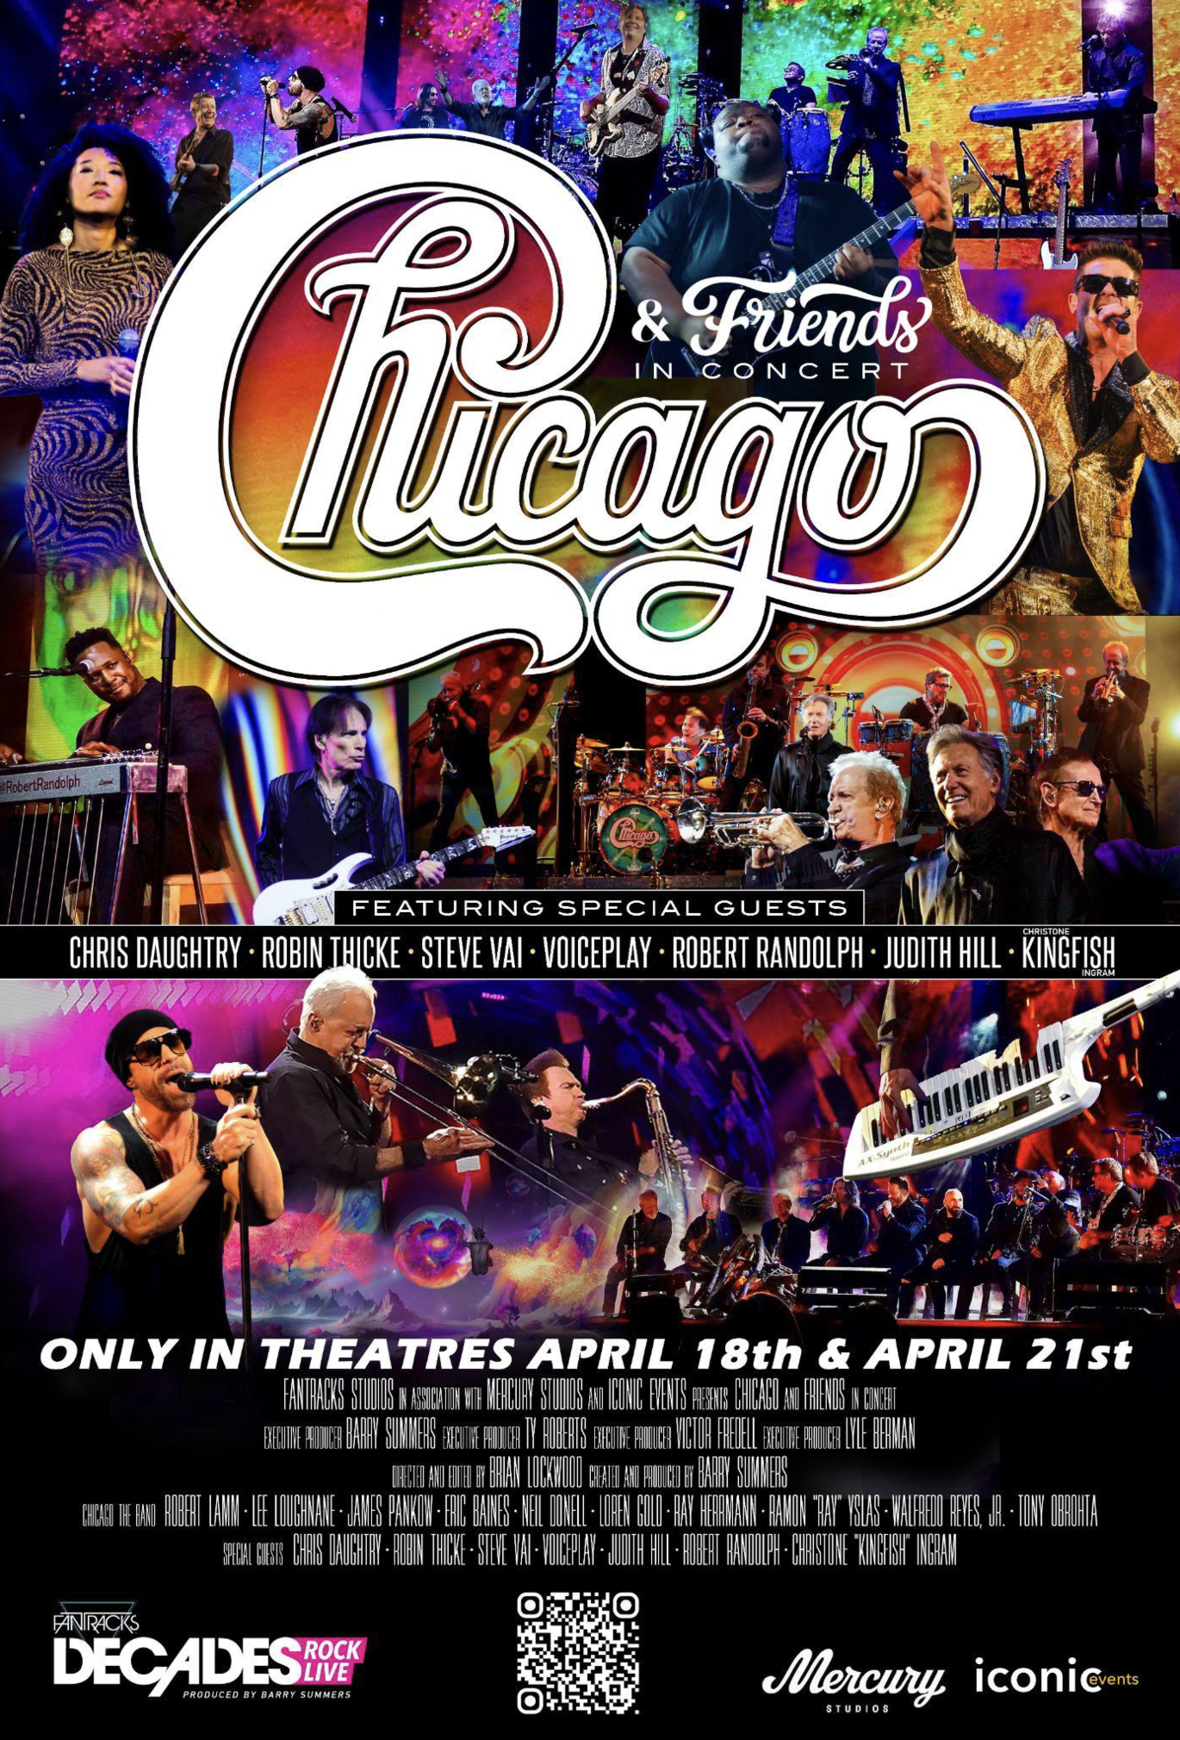 CHICAGO & FRIENDS IN CONCERT NATIONWIDE & CANADIAN FILM RELEASE APRIL 18 AND APRIL 21